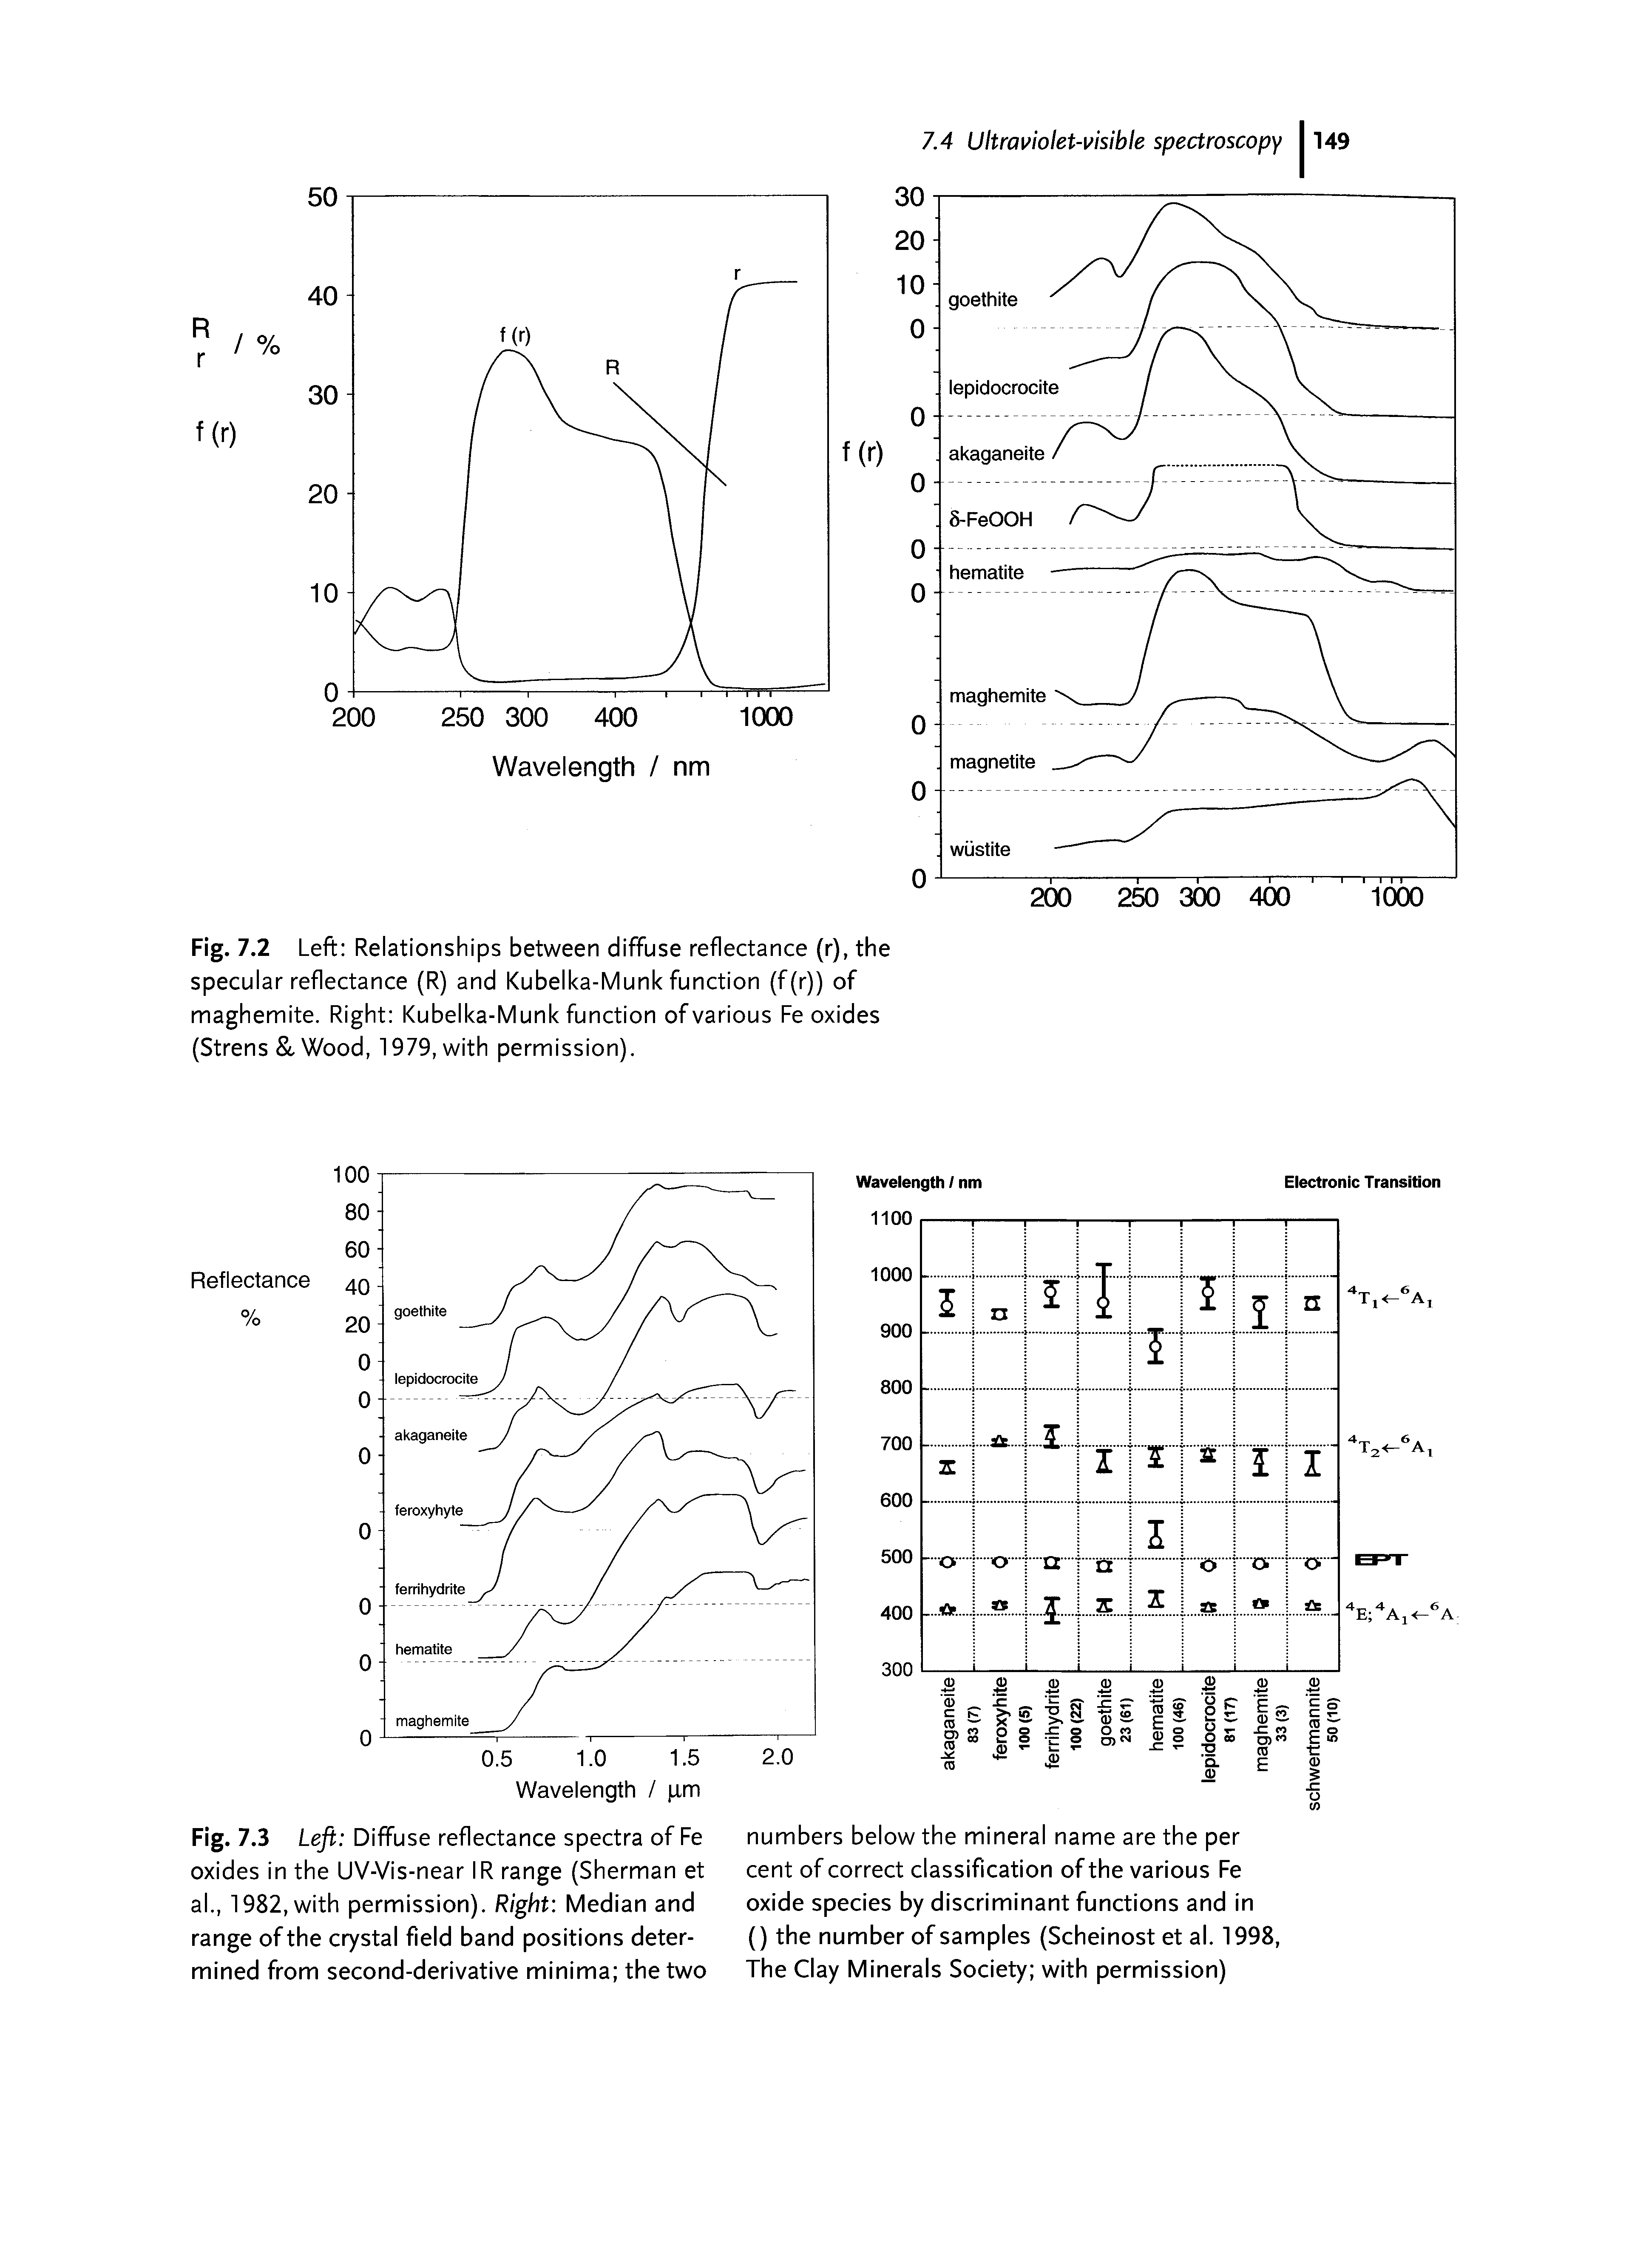 Fig. 7.2 Left Relationships between diffuse reflectance (r), the specular reflectance (R) and Kubelka-Munk function (f(r)) of maghemite. Right Kubelka-Munk function of various Fe oxides (Strens. Wood, 1979, with permission).